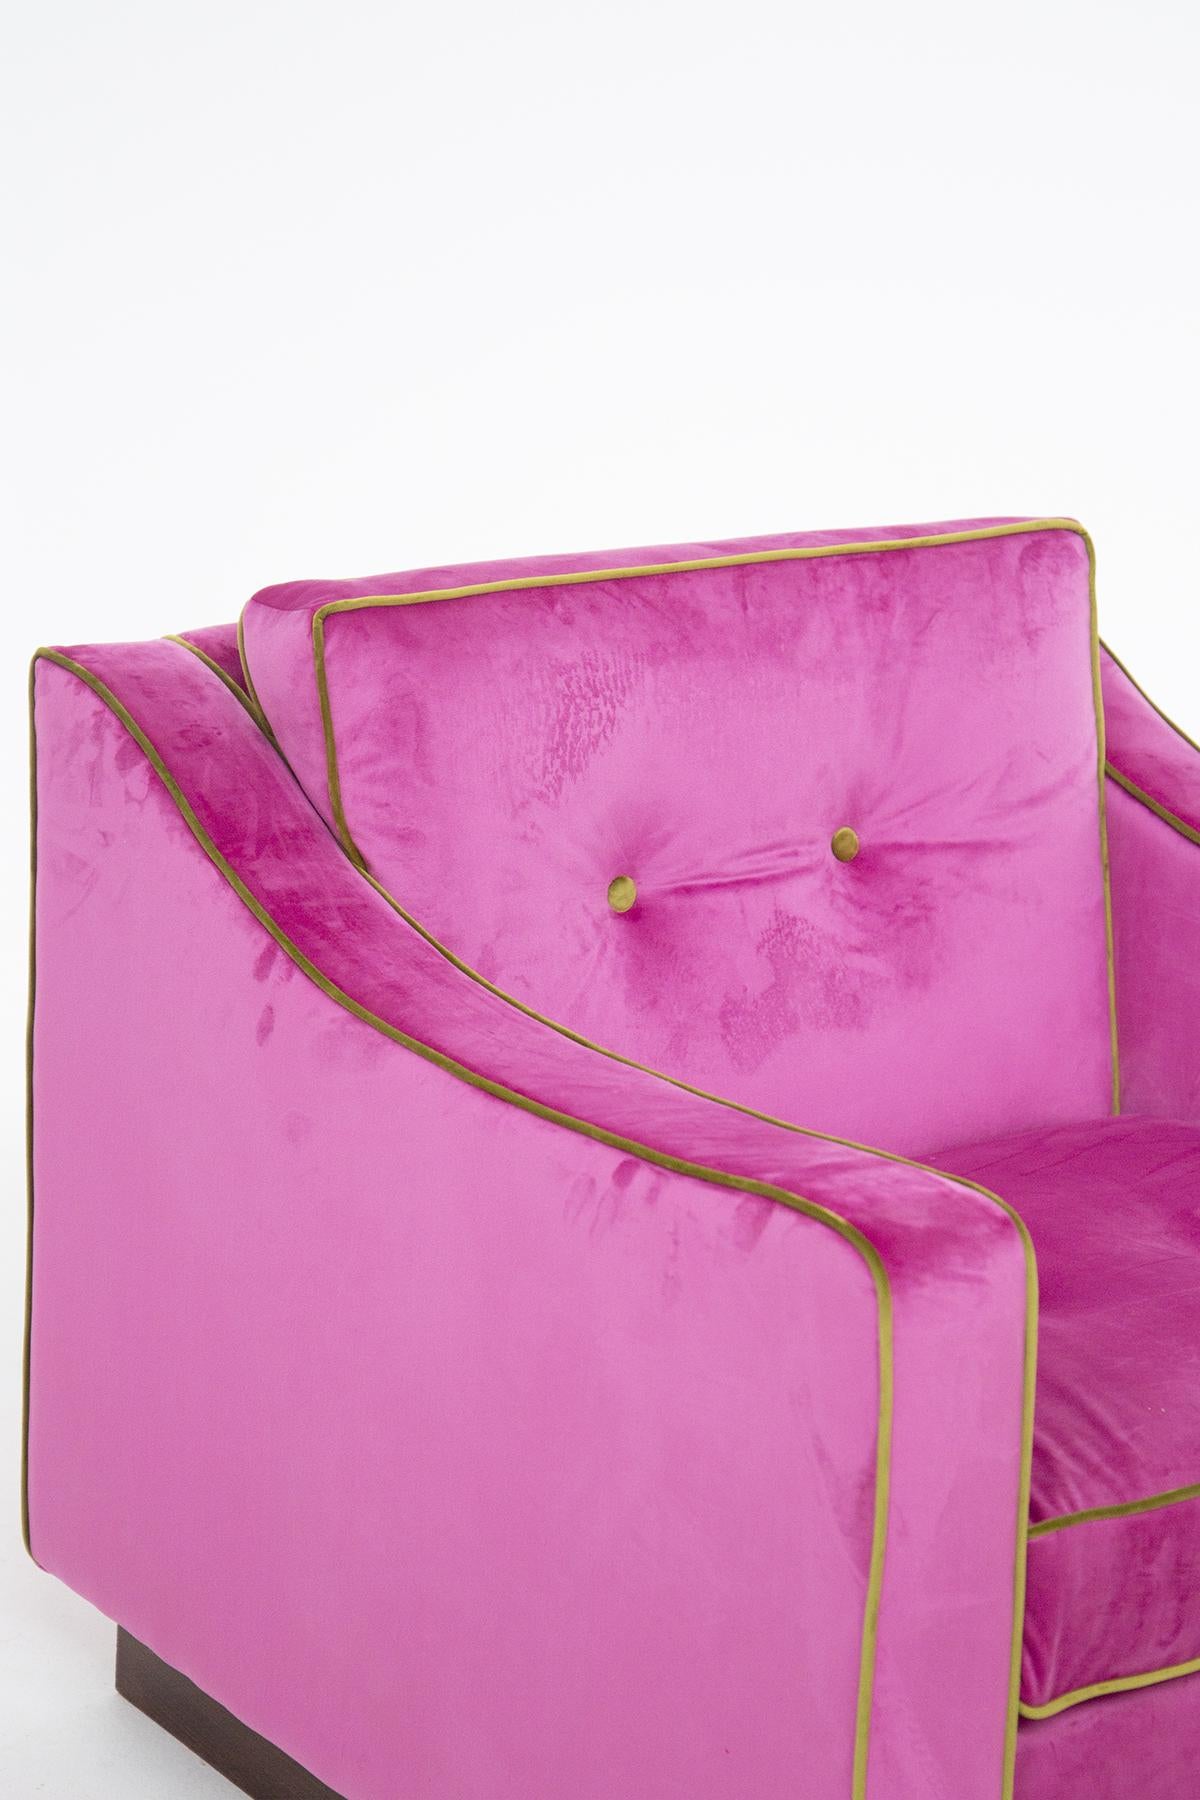 Eccentric pair of armchairs made in pink velvet by the designer Luciano Frigerio in the 60's of fine Italian manufacture.
The armchairs in velvet by Luciano Frigerio have a basic structure made of wood, while the seat and back have been